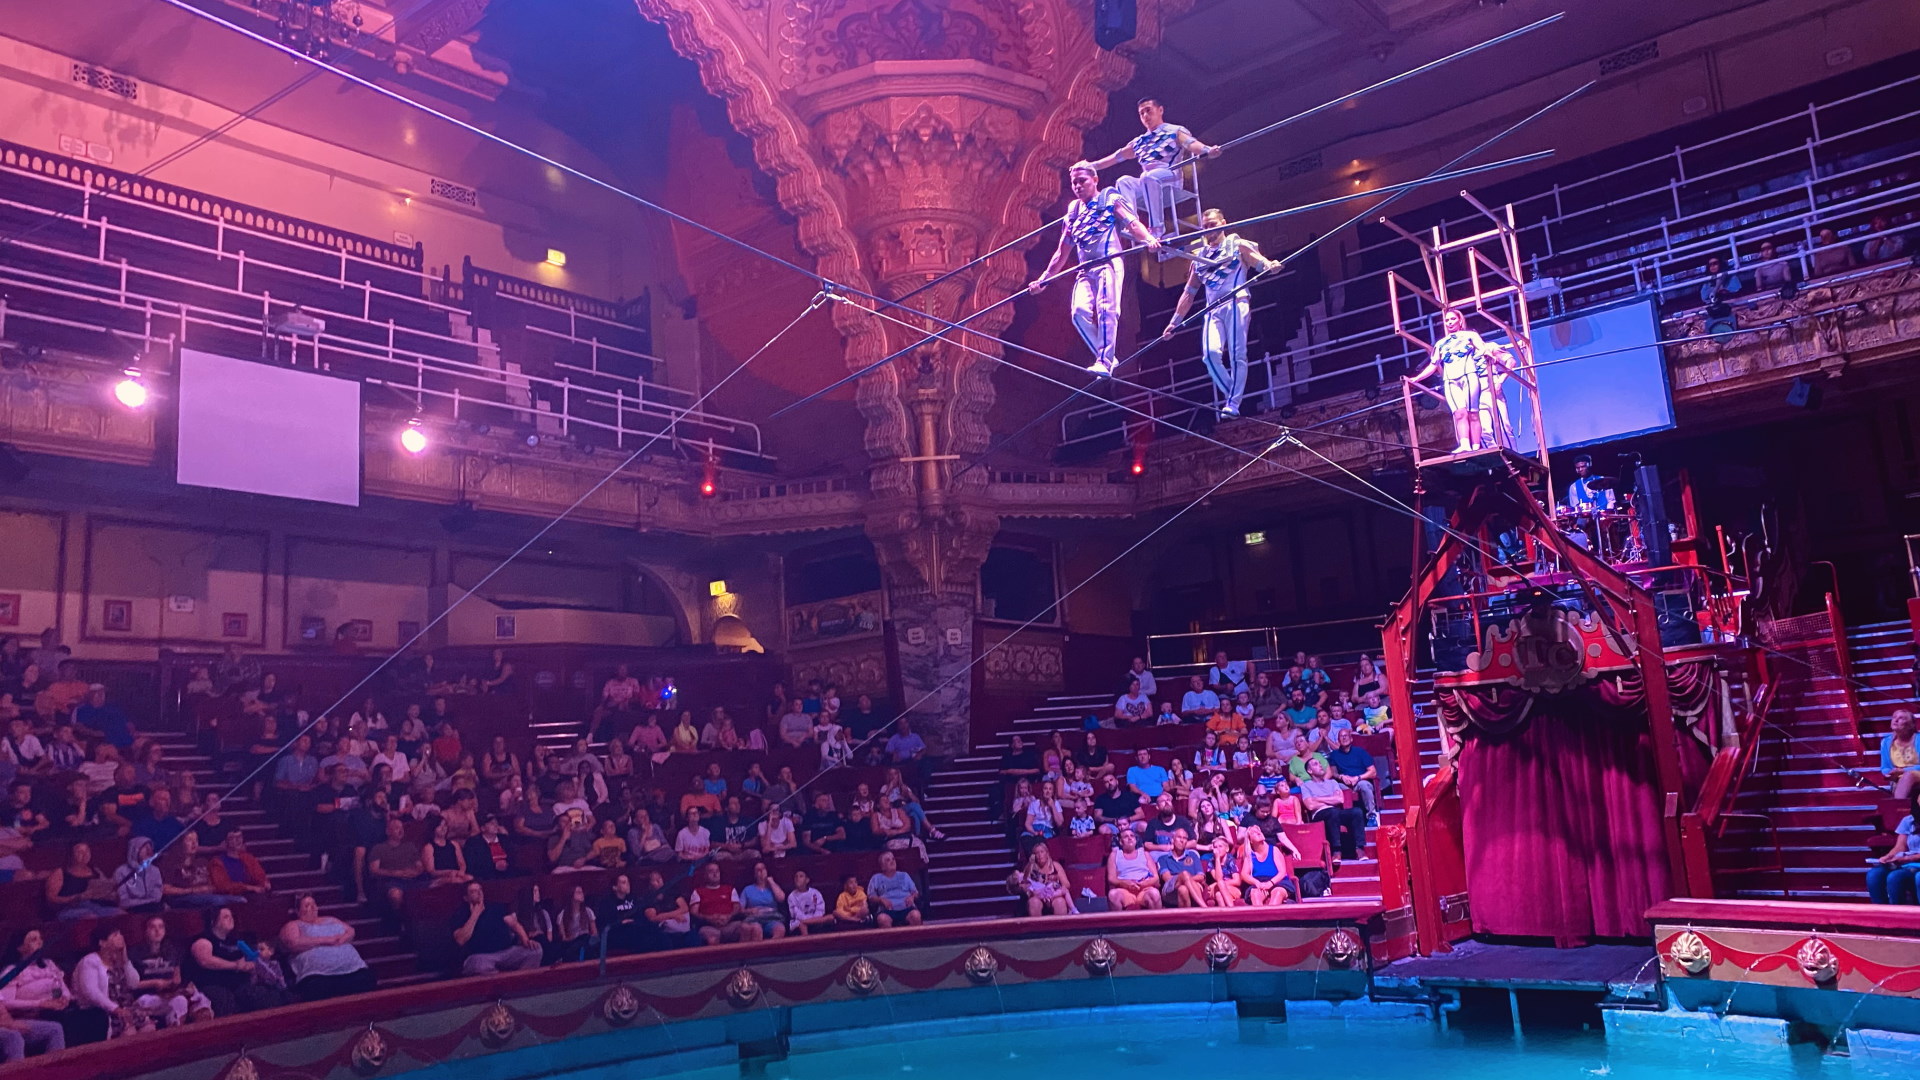 The Blackpool Tower Circus - The High Wire